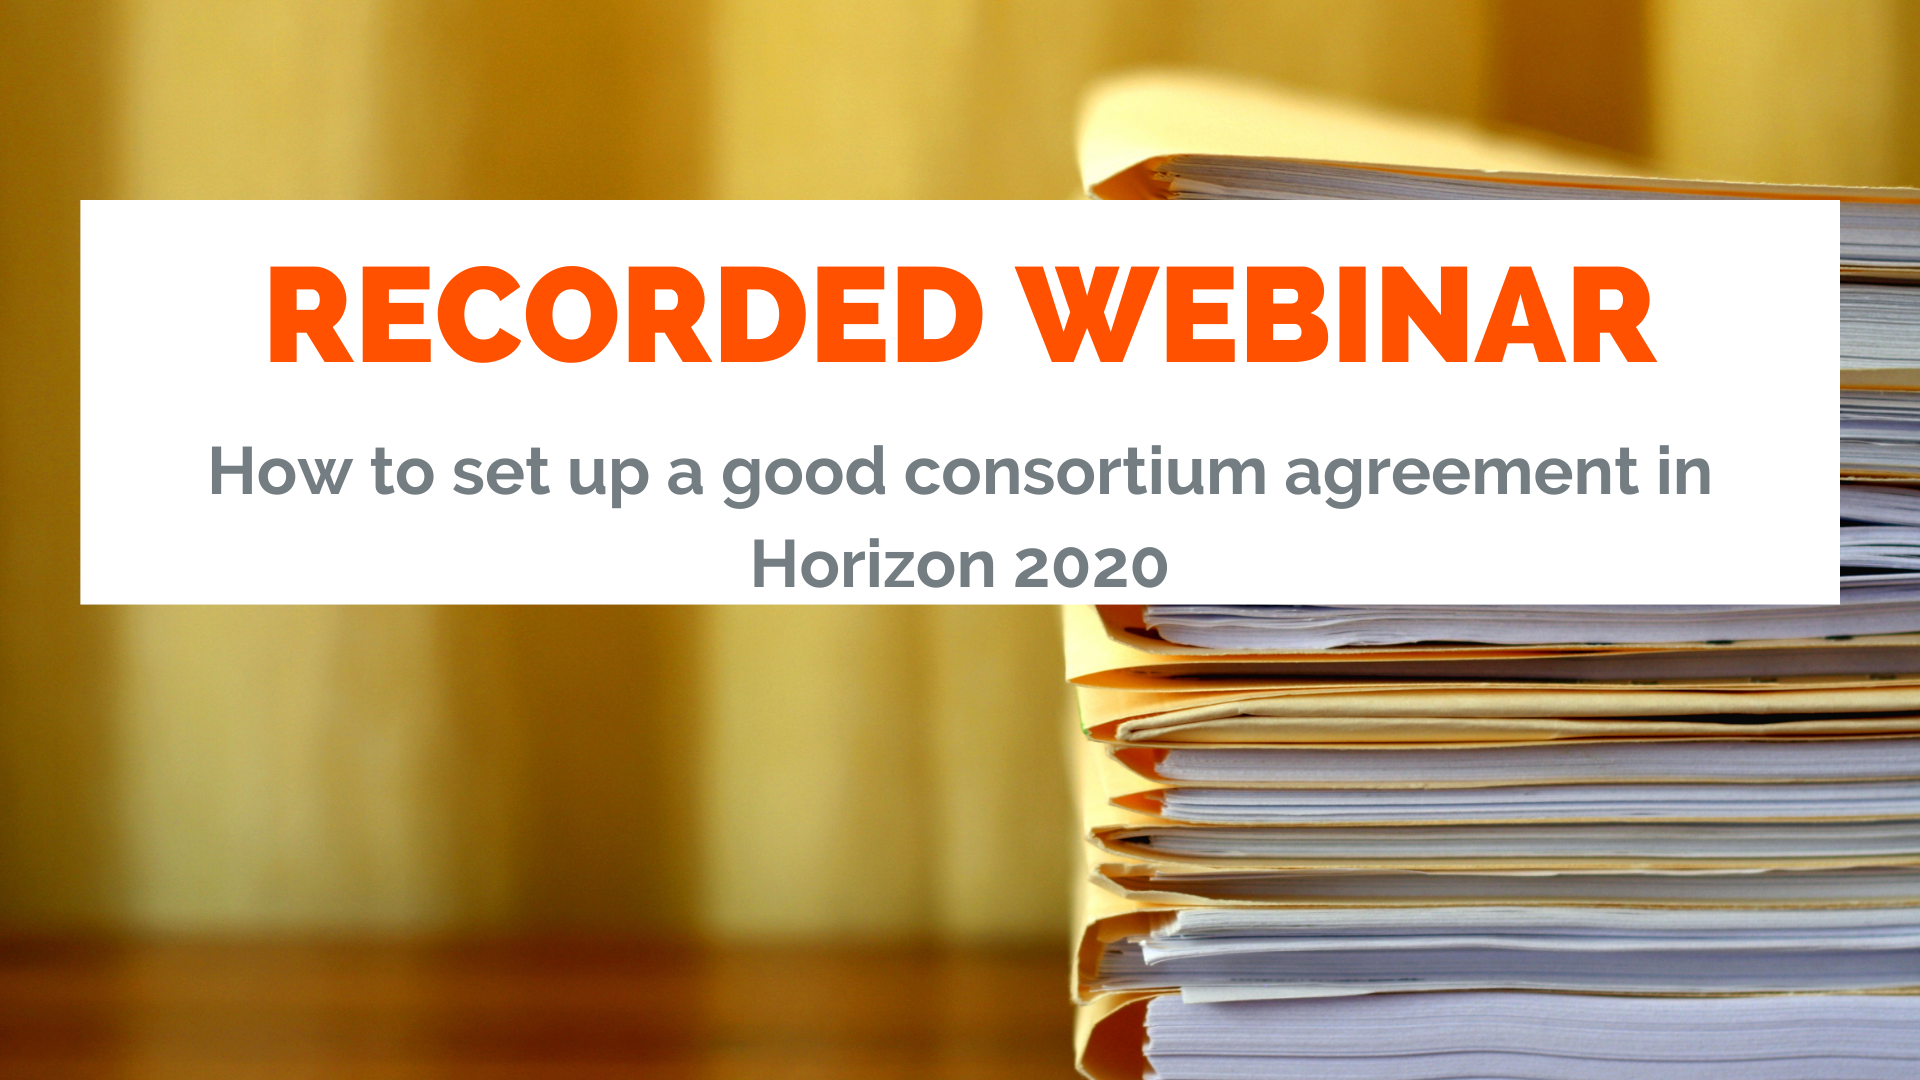 How to set up a good consortium agreement in Horizon 2020